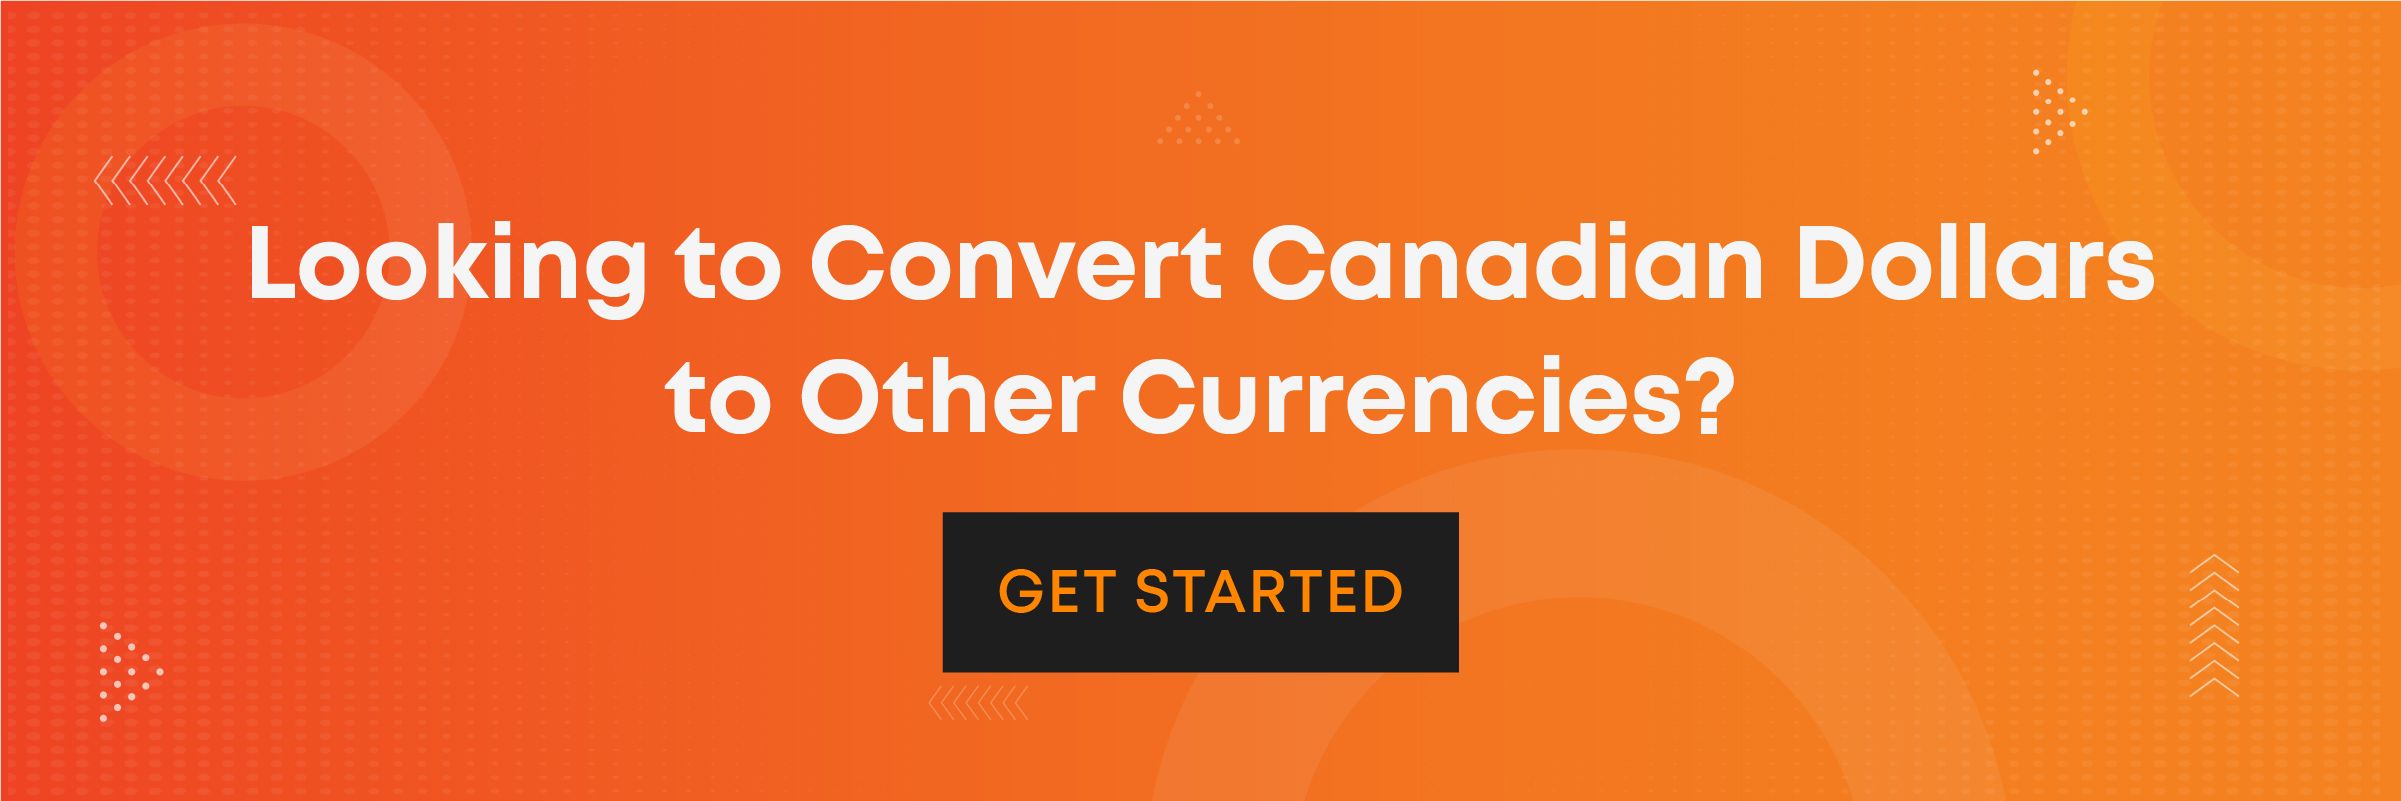 Looking to Convert Canadian Dollars to Other Currencies